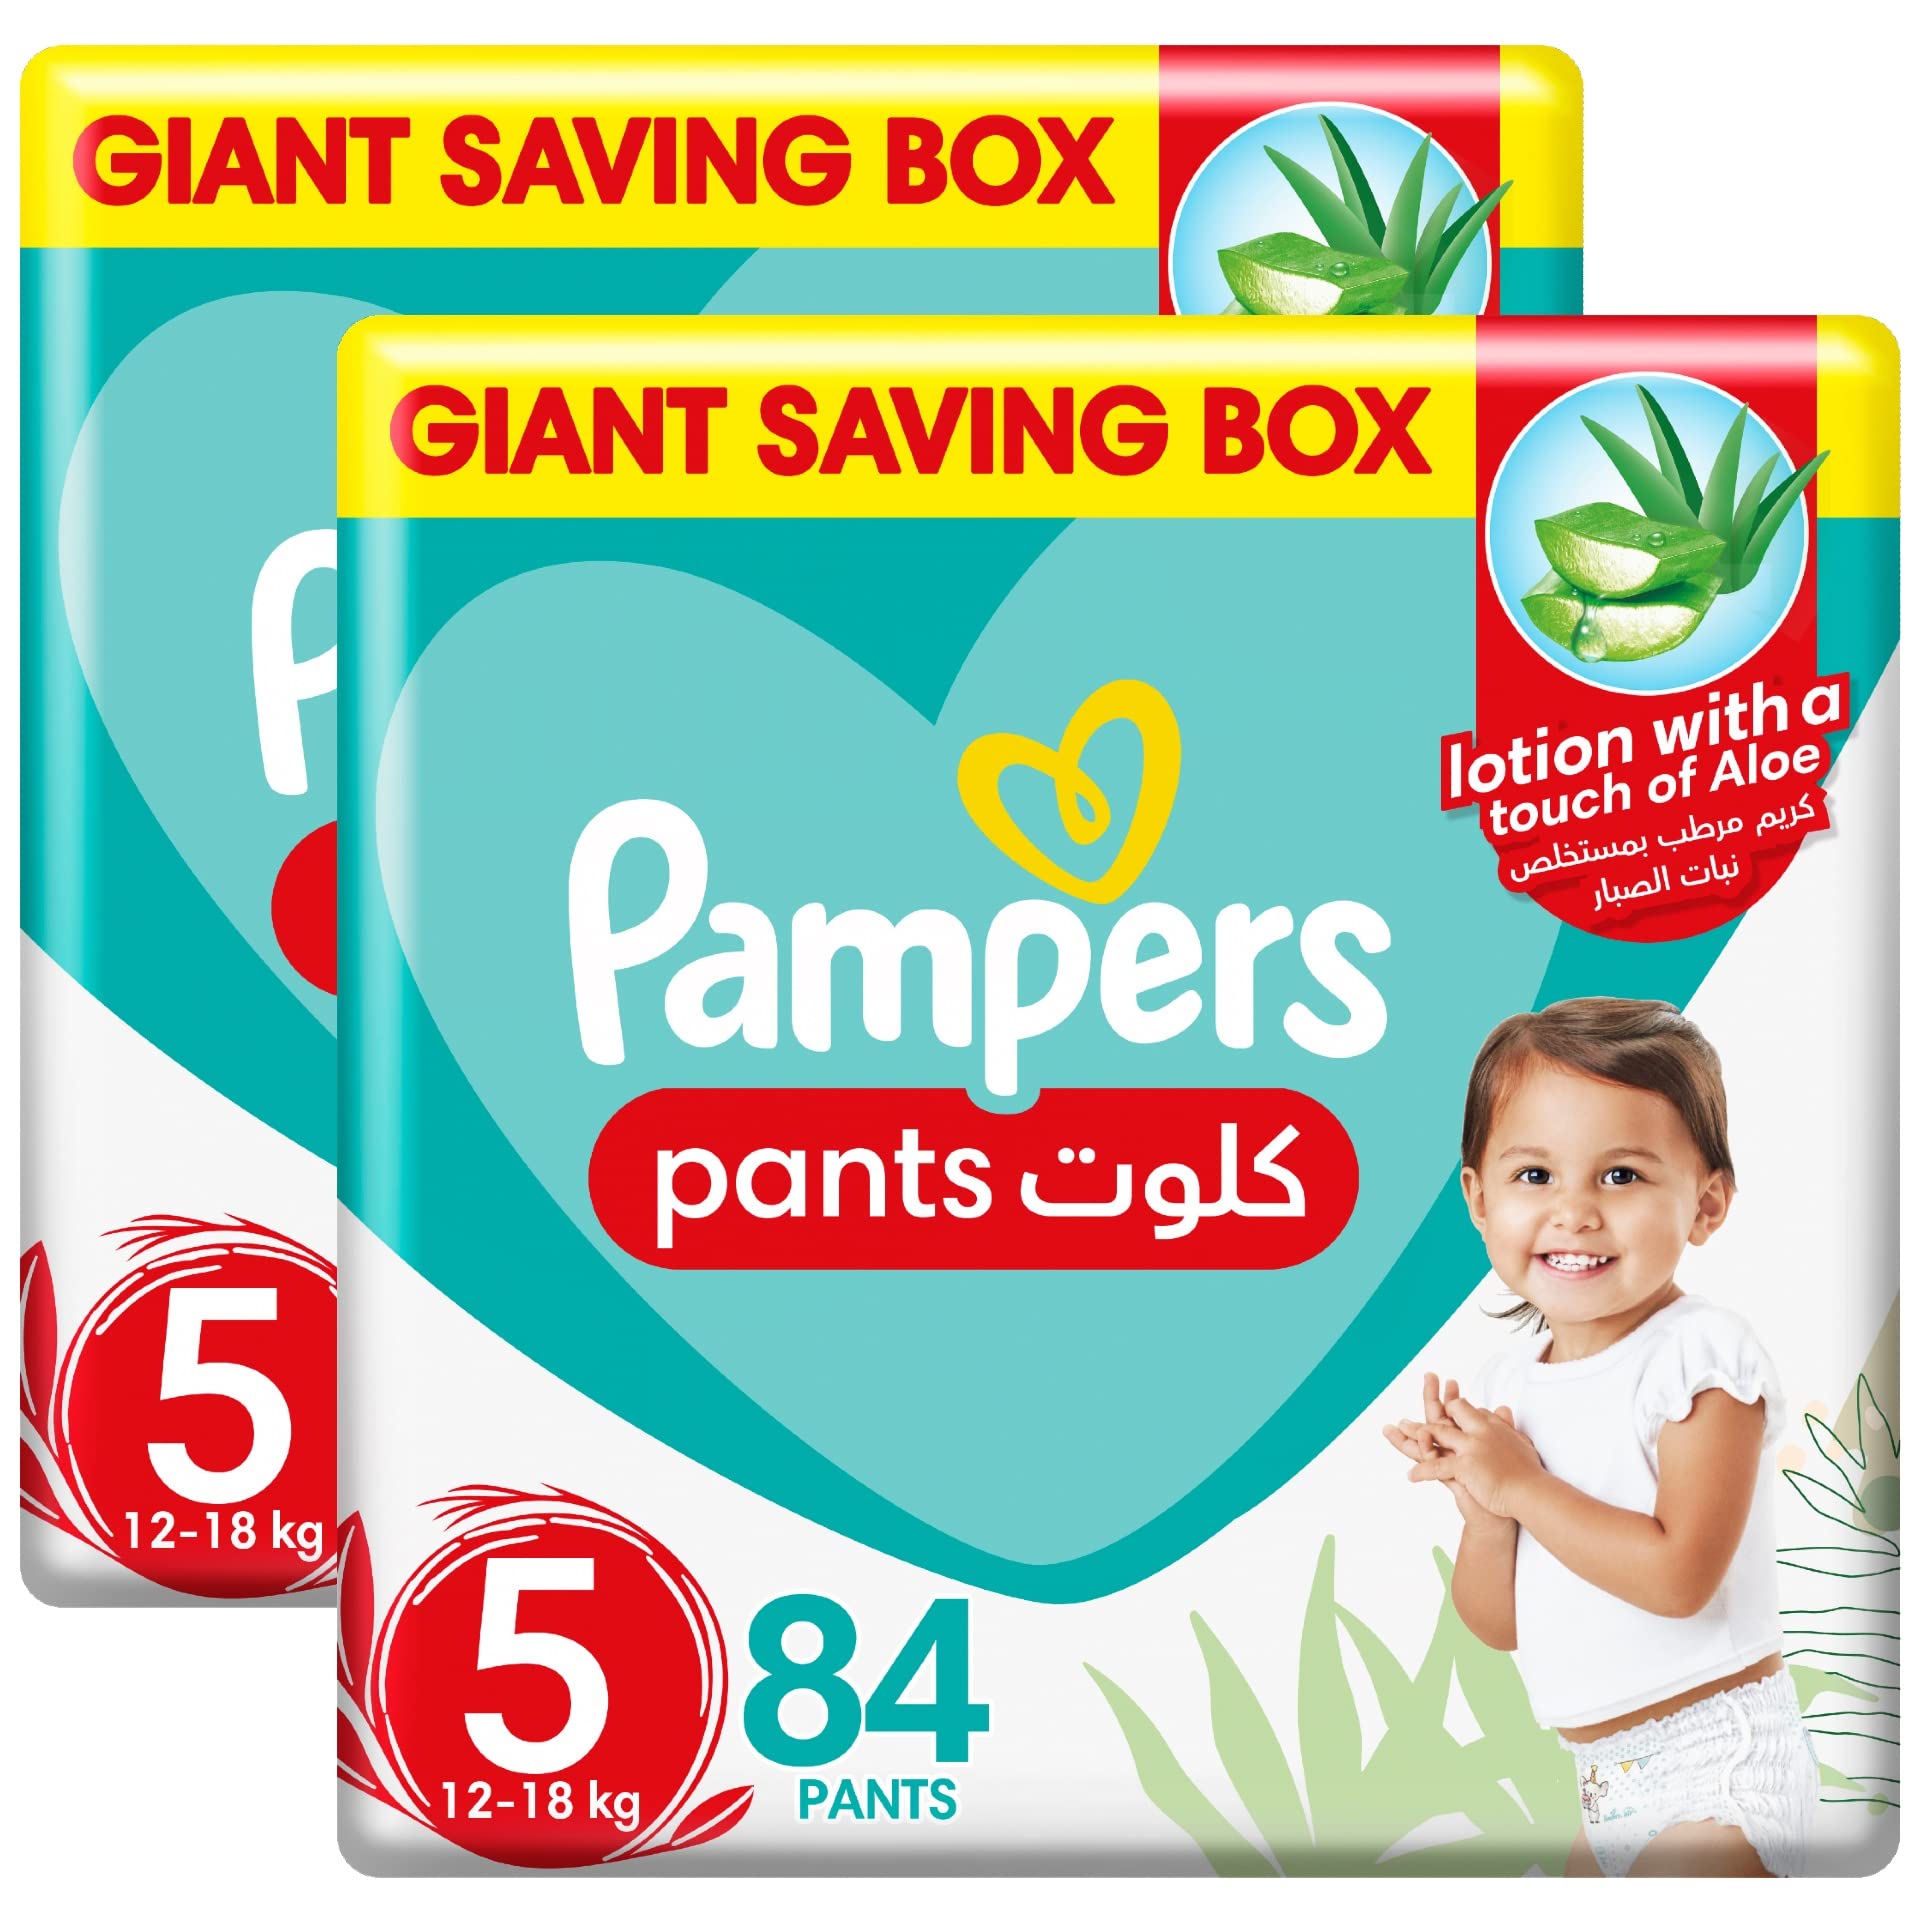 Pampers Baby-Dry Pants with Aloe Vera Lotion, Stretchy Sides, and Leakage Protection, Size 5, 12-18 kg, Mega Box, 168 Pants حفاض بيبي دراي بامبرز مقاس 5 لوزن 12-18 كجم، عبوة من 168 حفاض